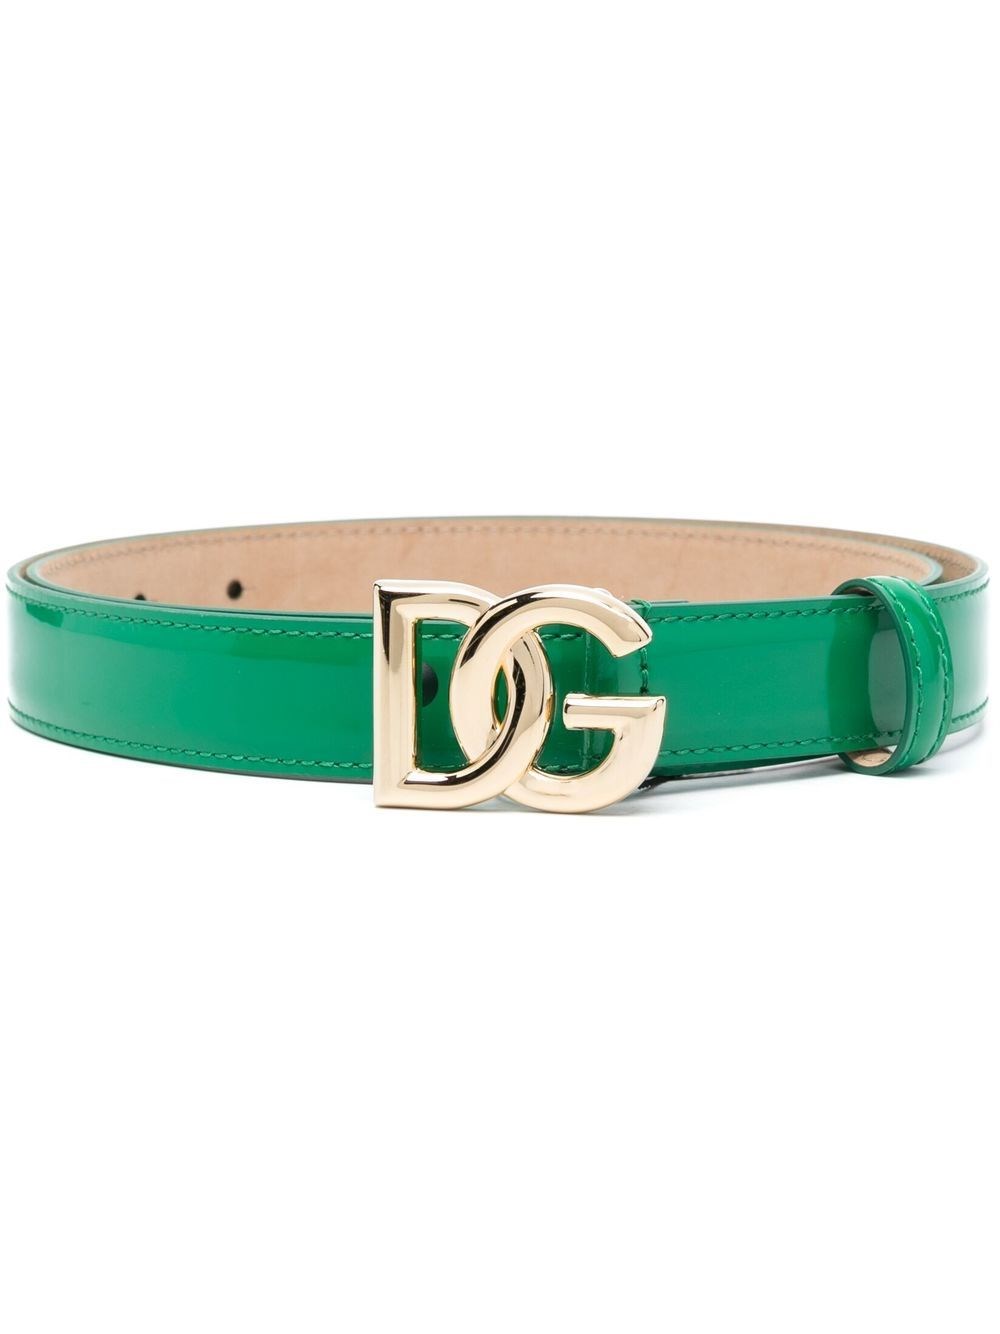 DOLCE & GABBANA PATENT LEATHER BELT WITH LOGO PLAQUE